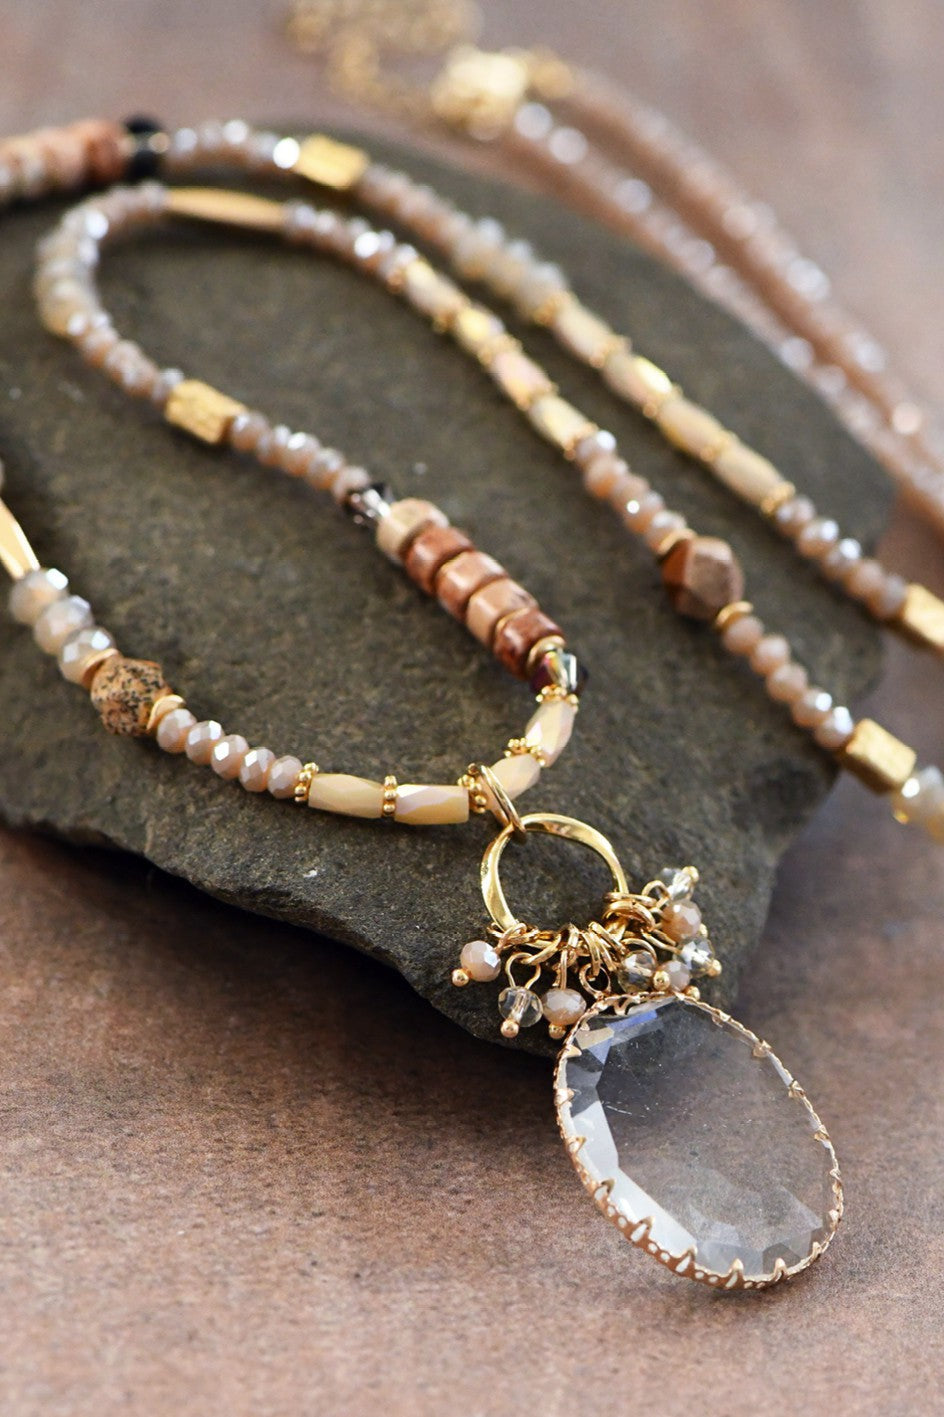 Mixed Stone Bead Necklace with Crystal Pendant